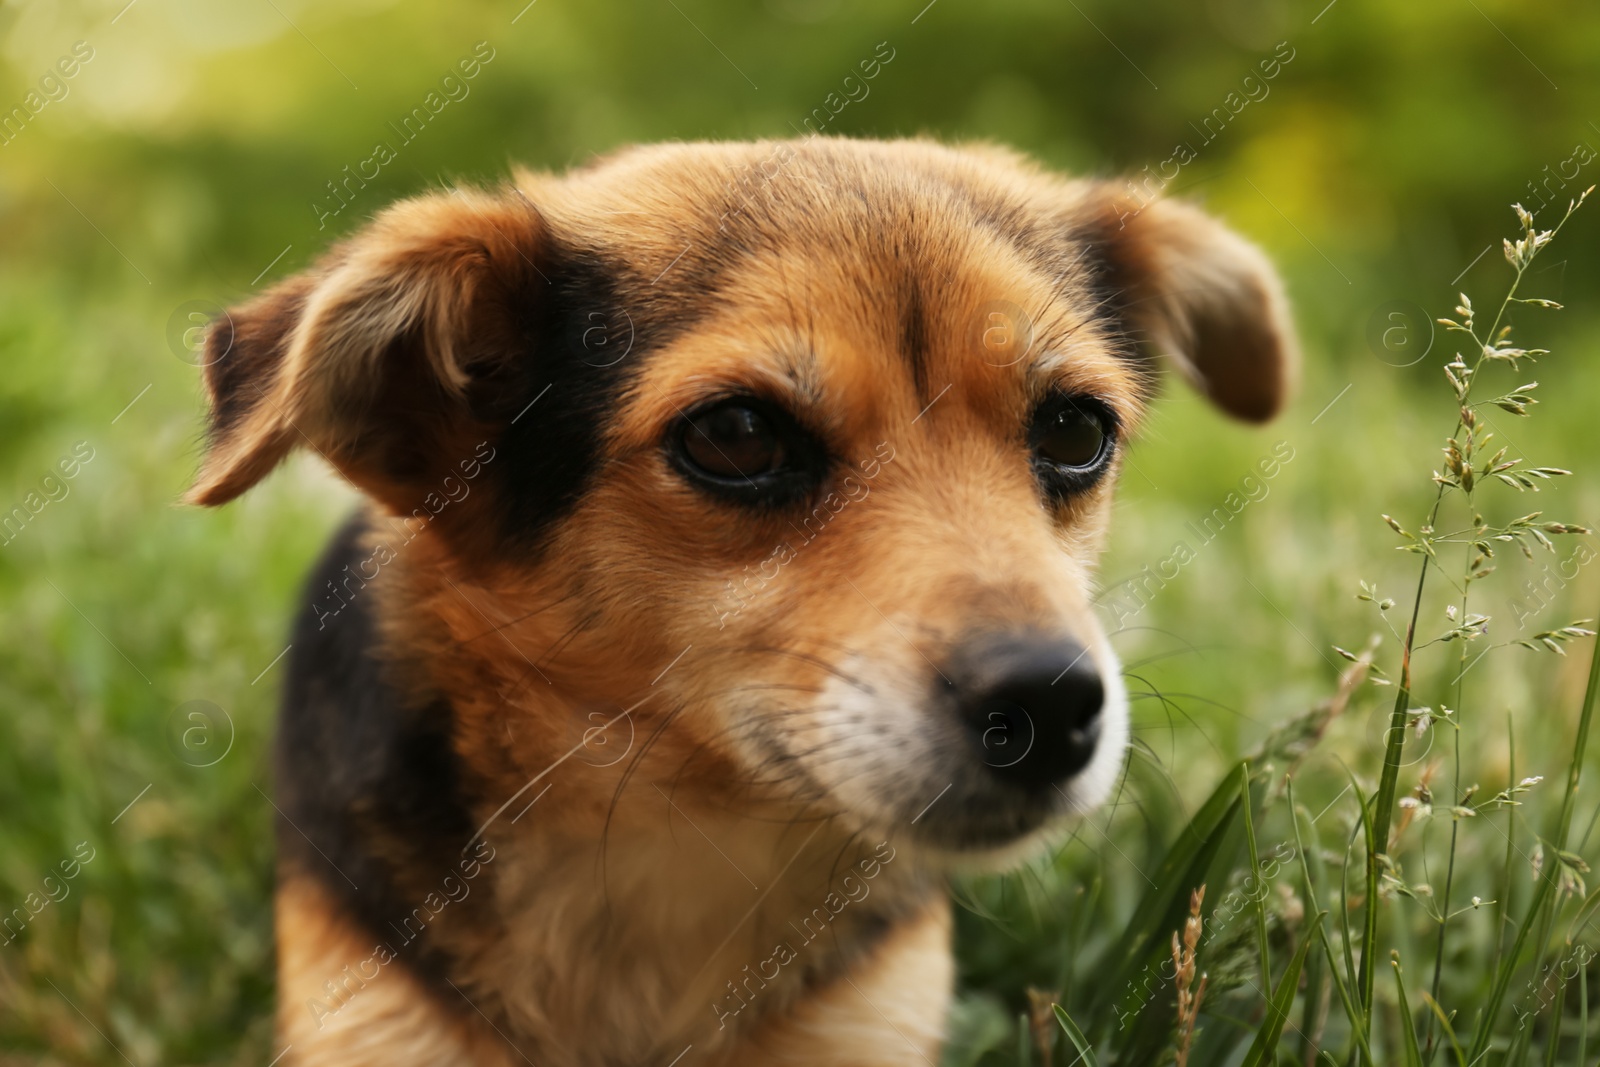 Photo of Cute dog on green grass outdoors, closeup view